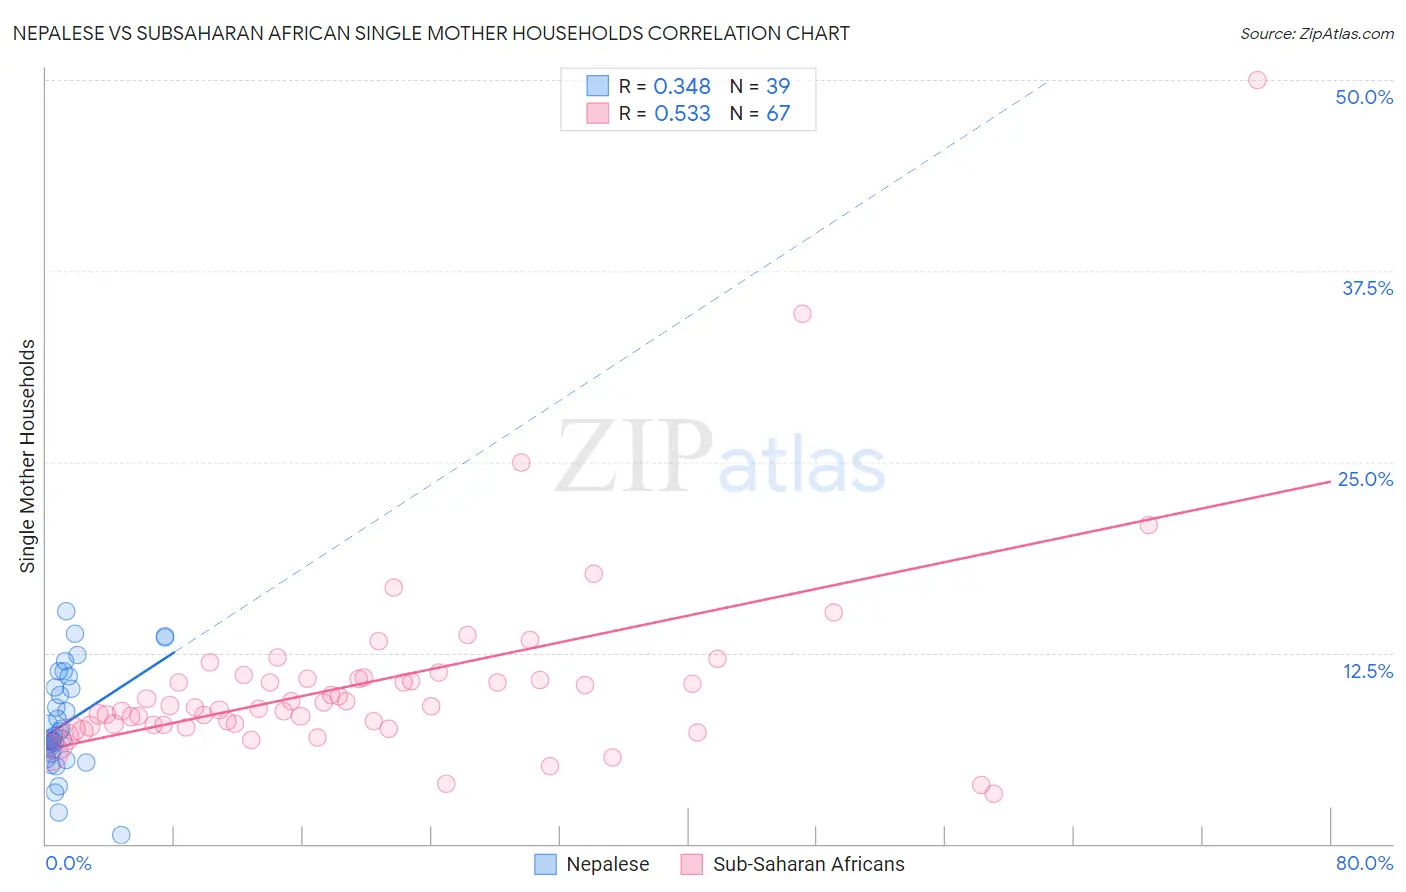 Nepalese vs Subsaharan African Single Mother Households